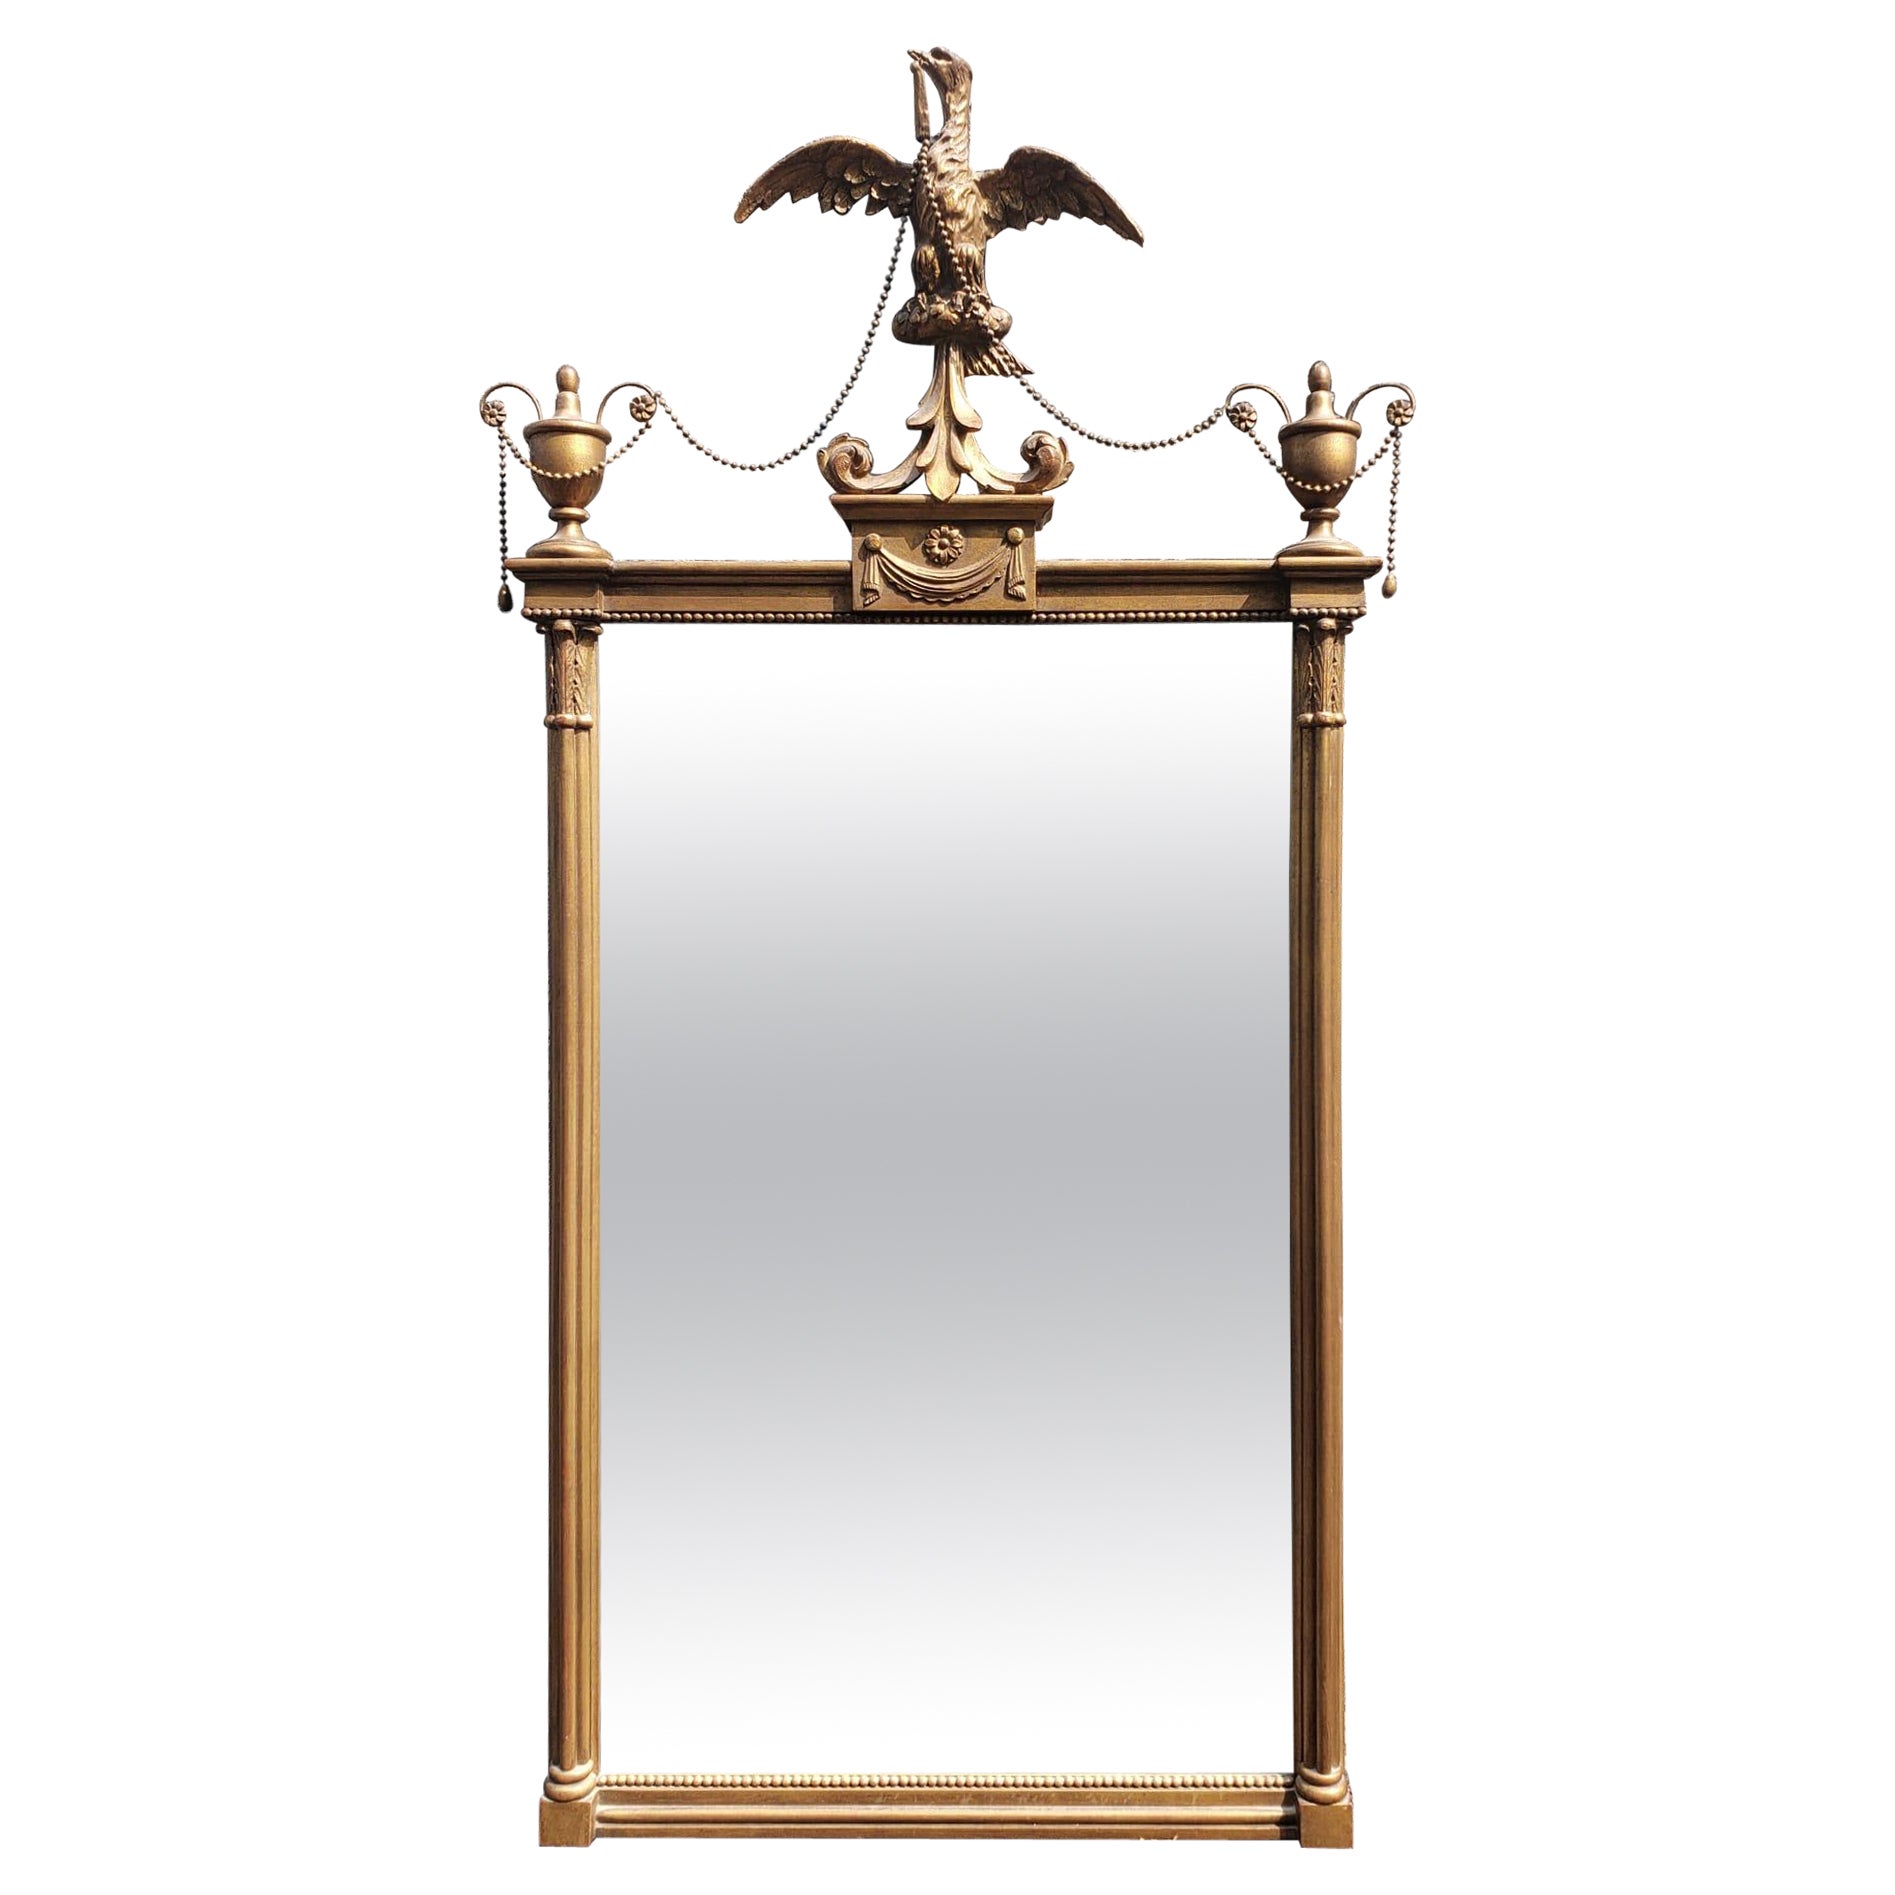 Early 20th Century Federal Style Gilt Decorated Eagle Pediment Frame Mirror